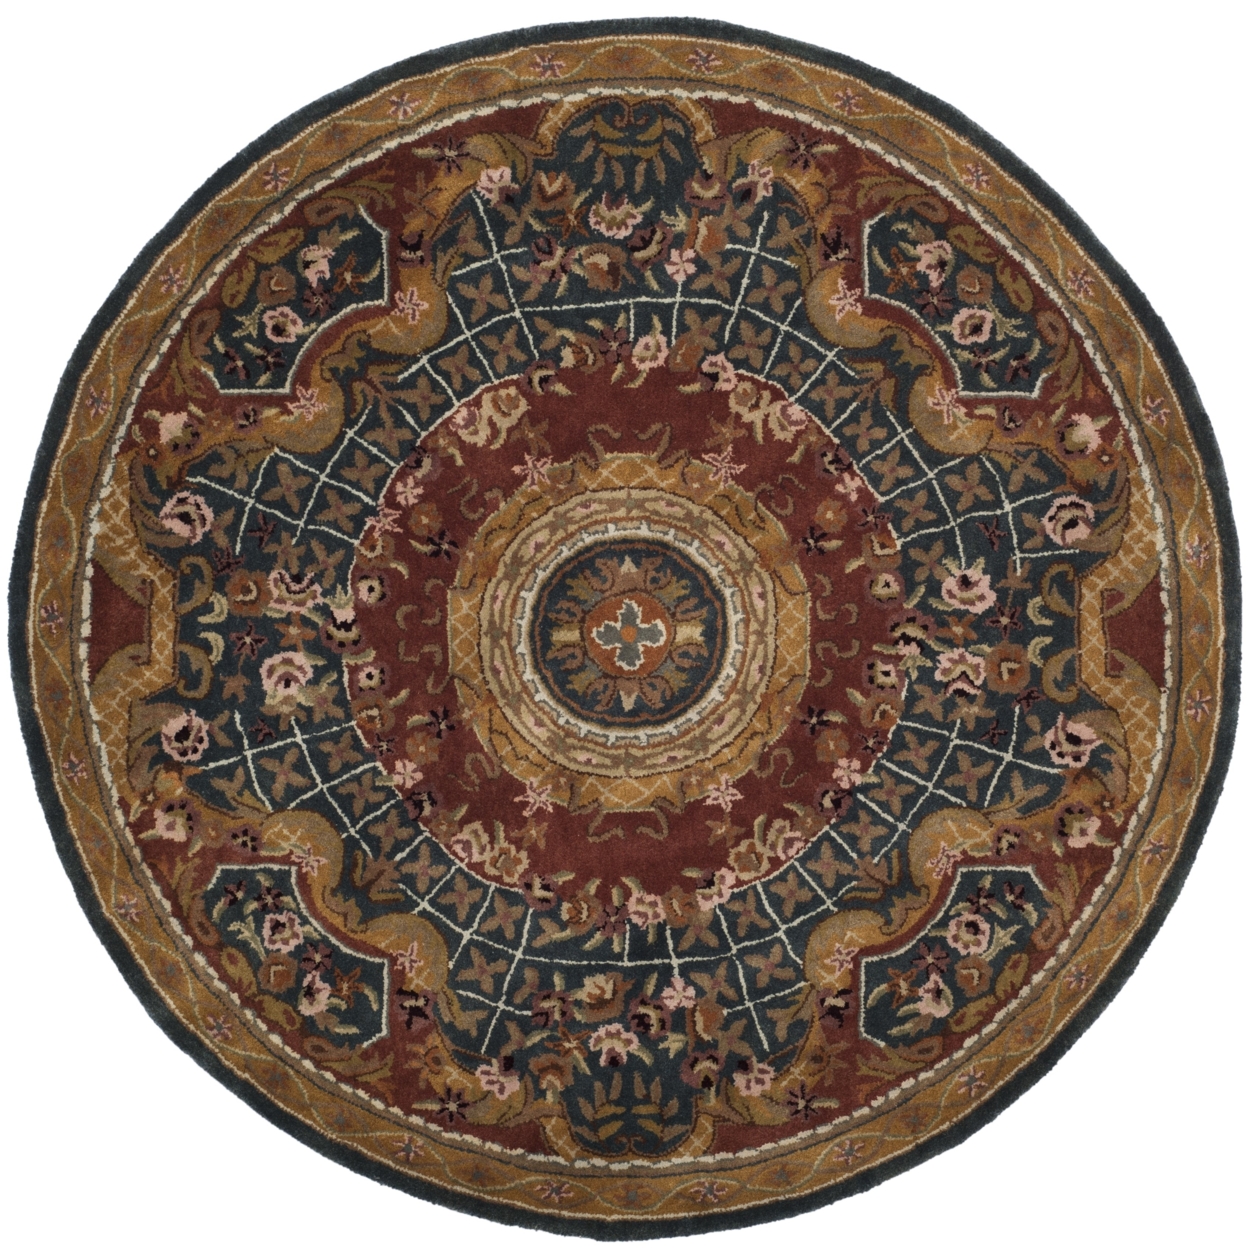 SAFAVIEH Classic Collection CL304C Handmade Assorted Rug - 8' Round